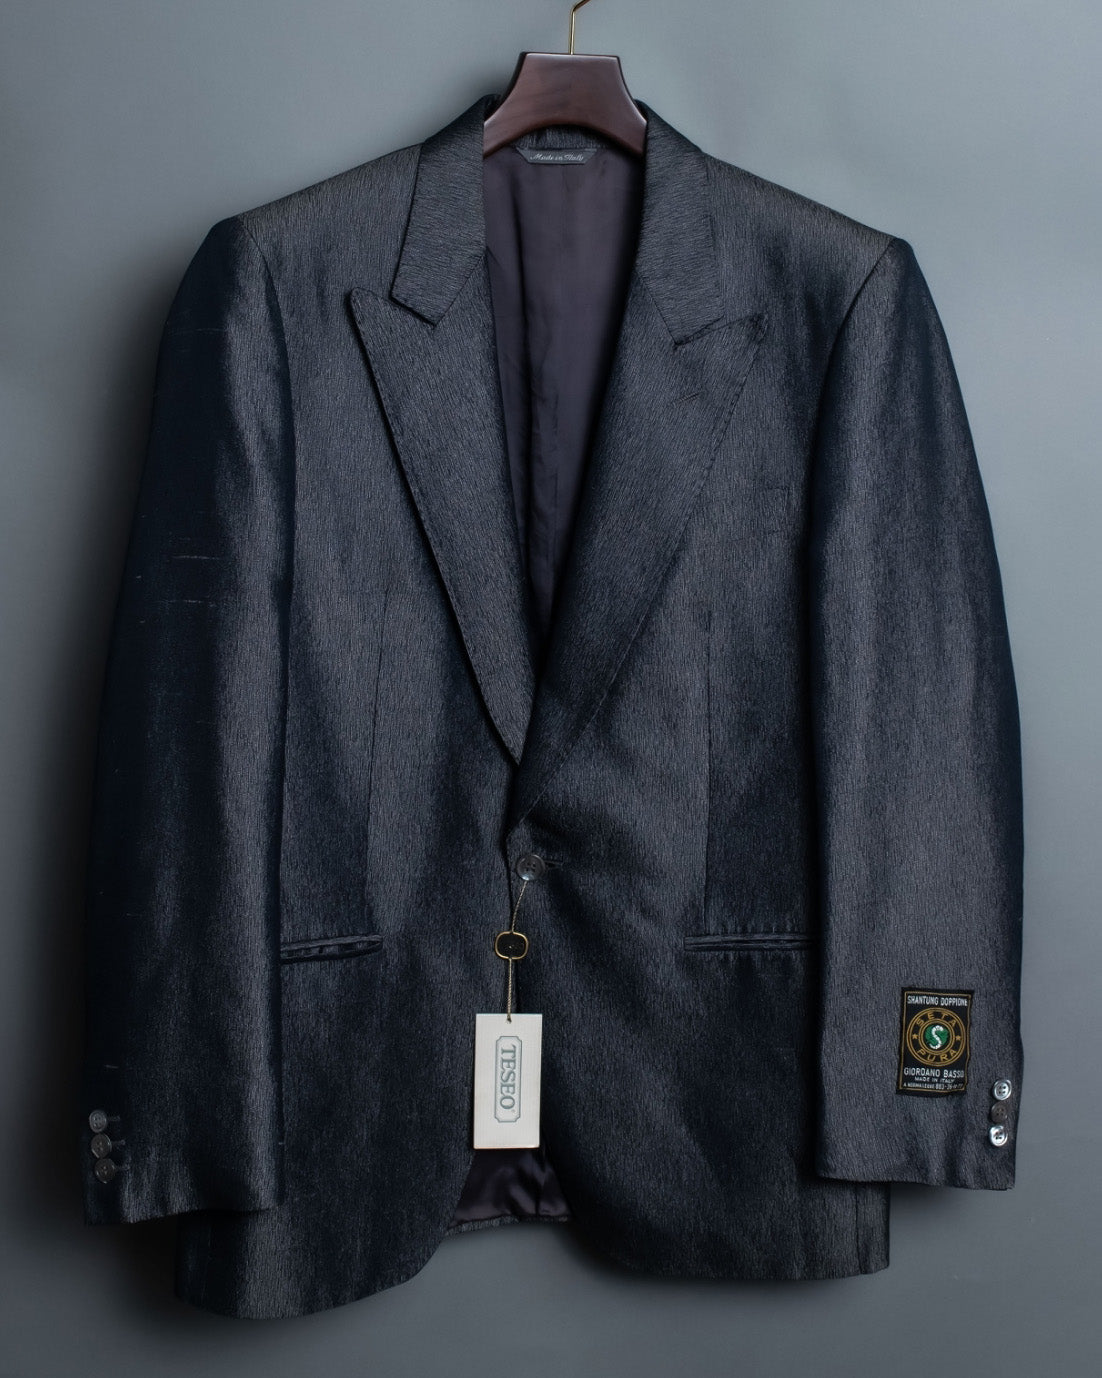 "DEAD STOCK" Dull And Glowing Gray Tailored Jacket